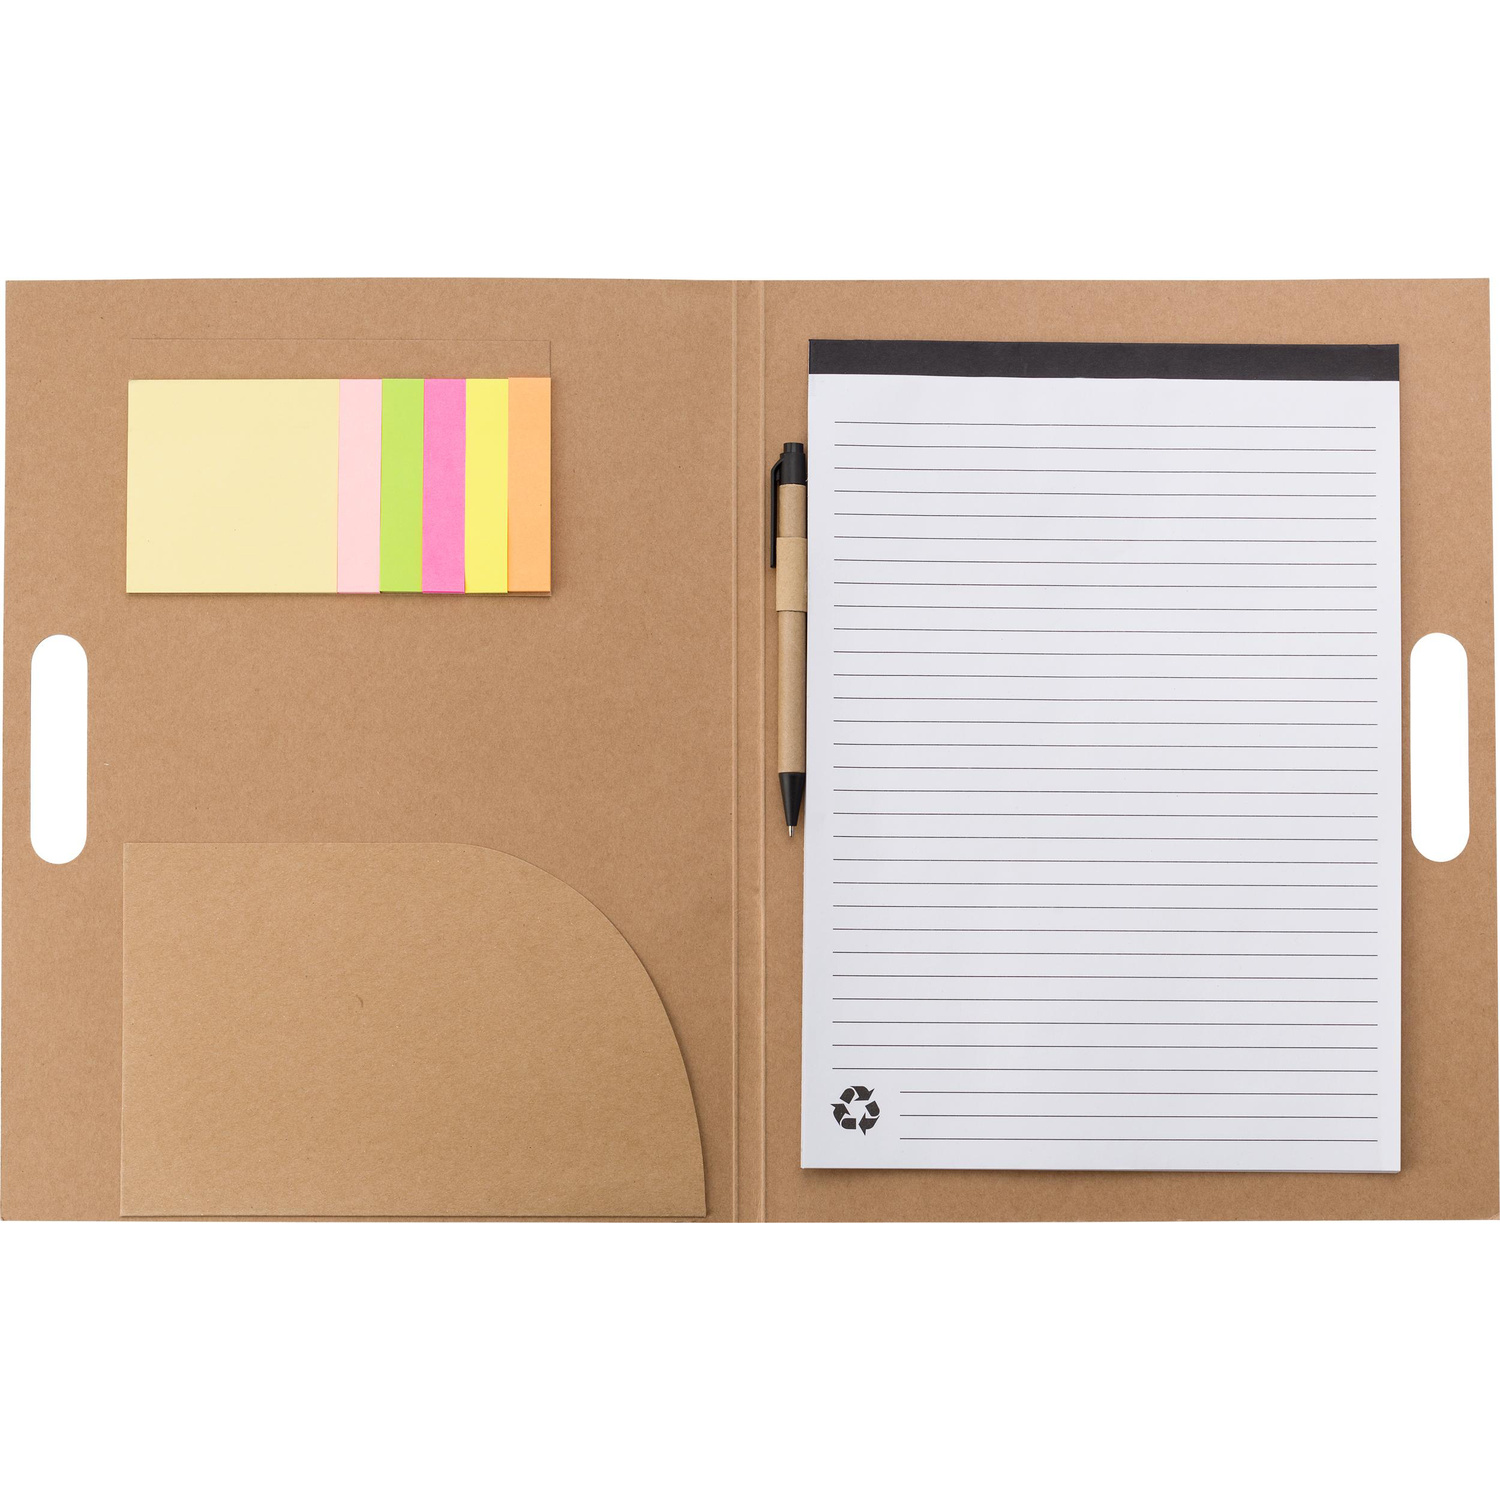 006417 011999999 2d090 ins pro01 fal - Folder with card cover